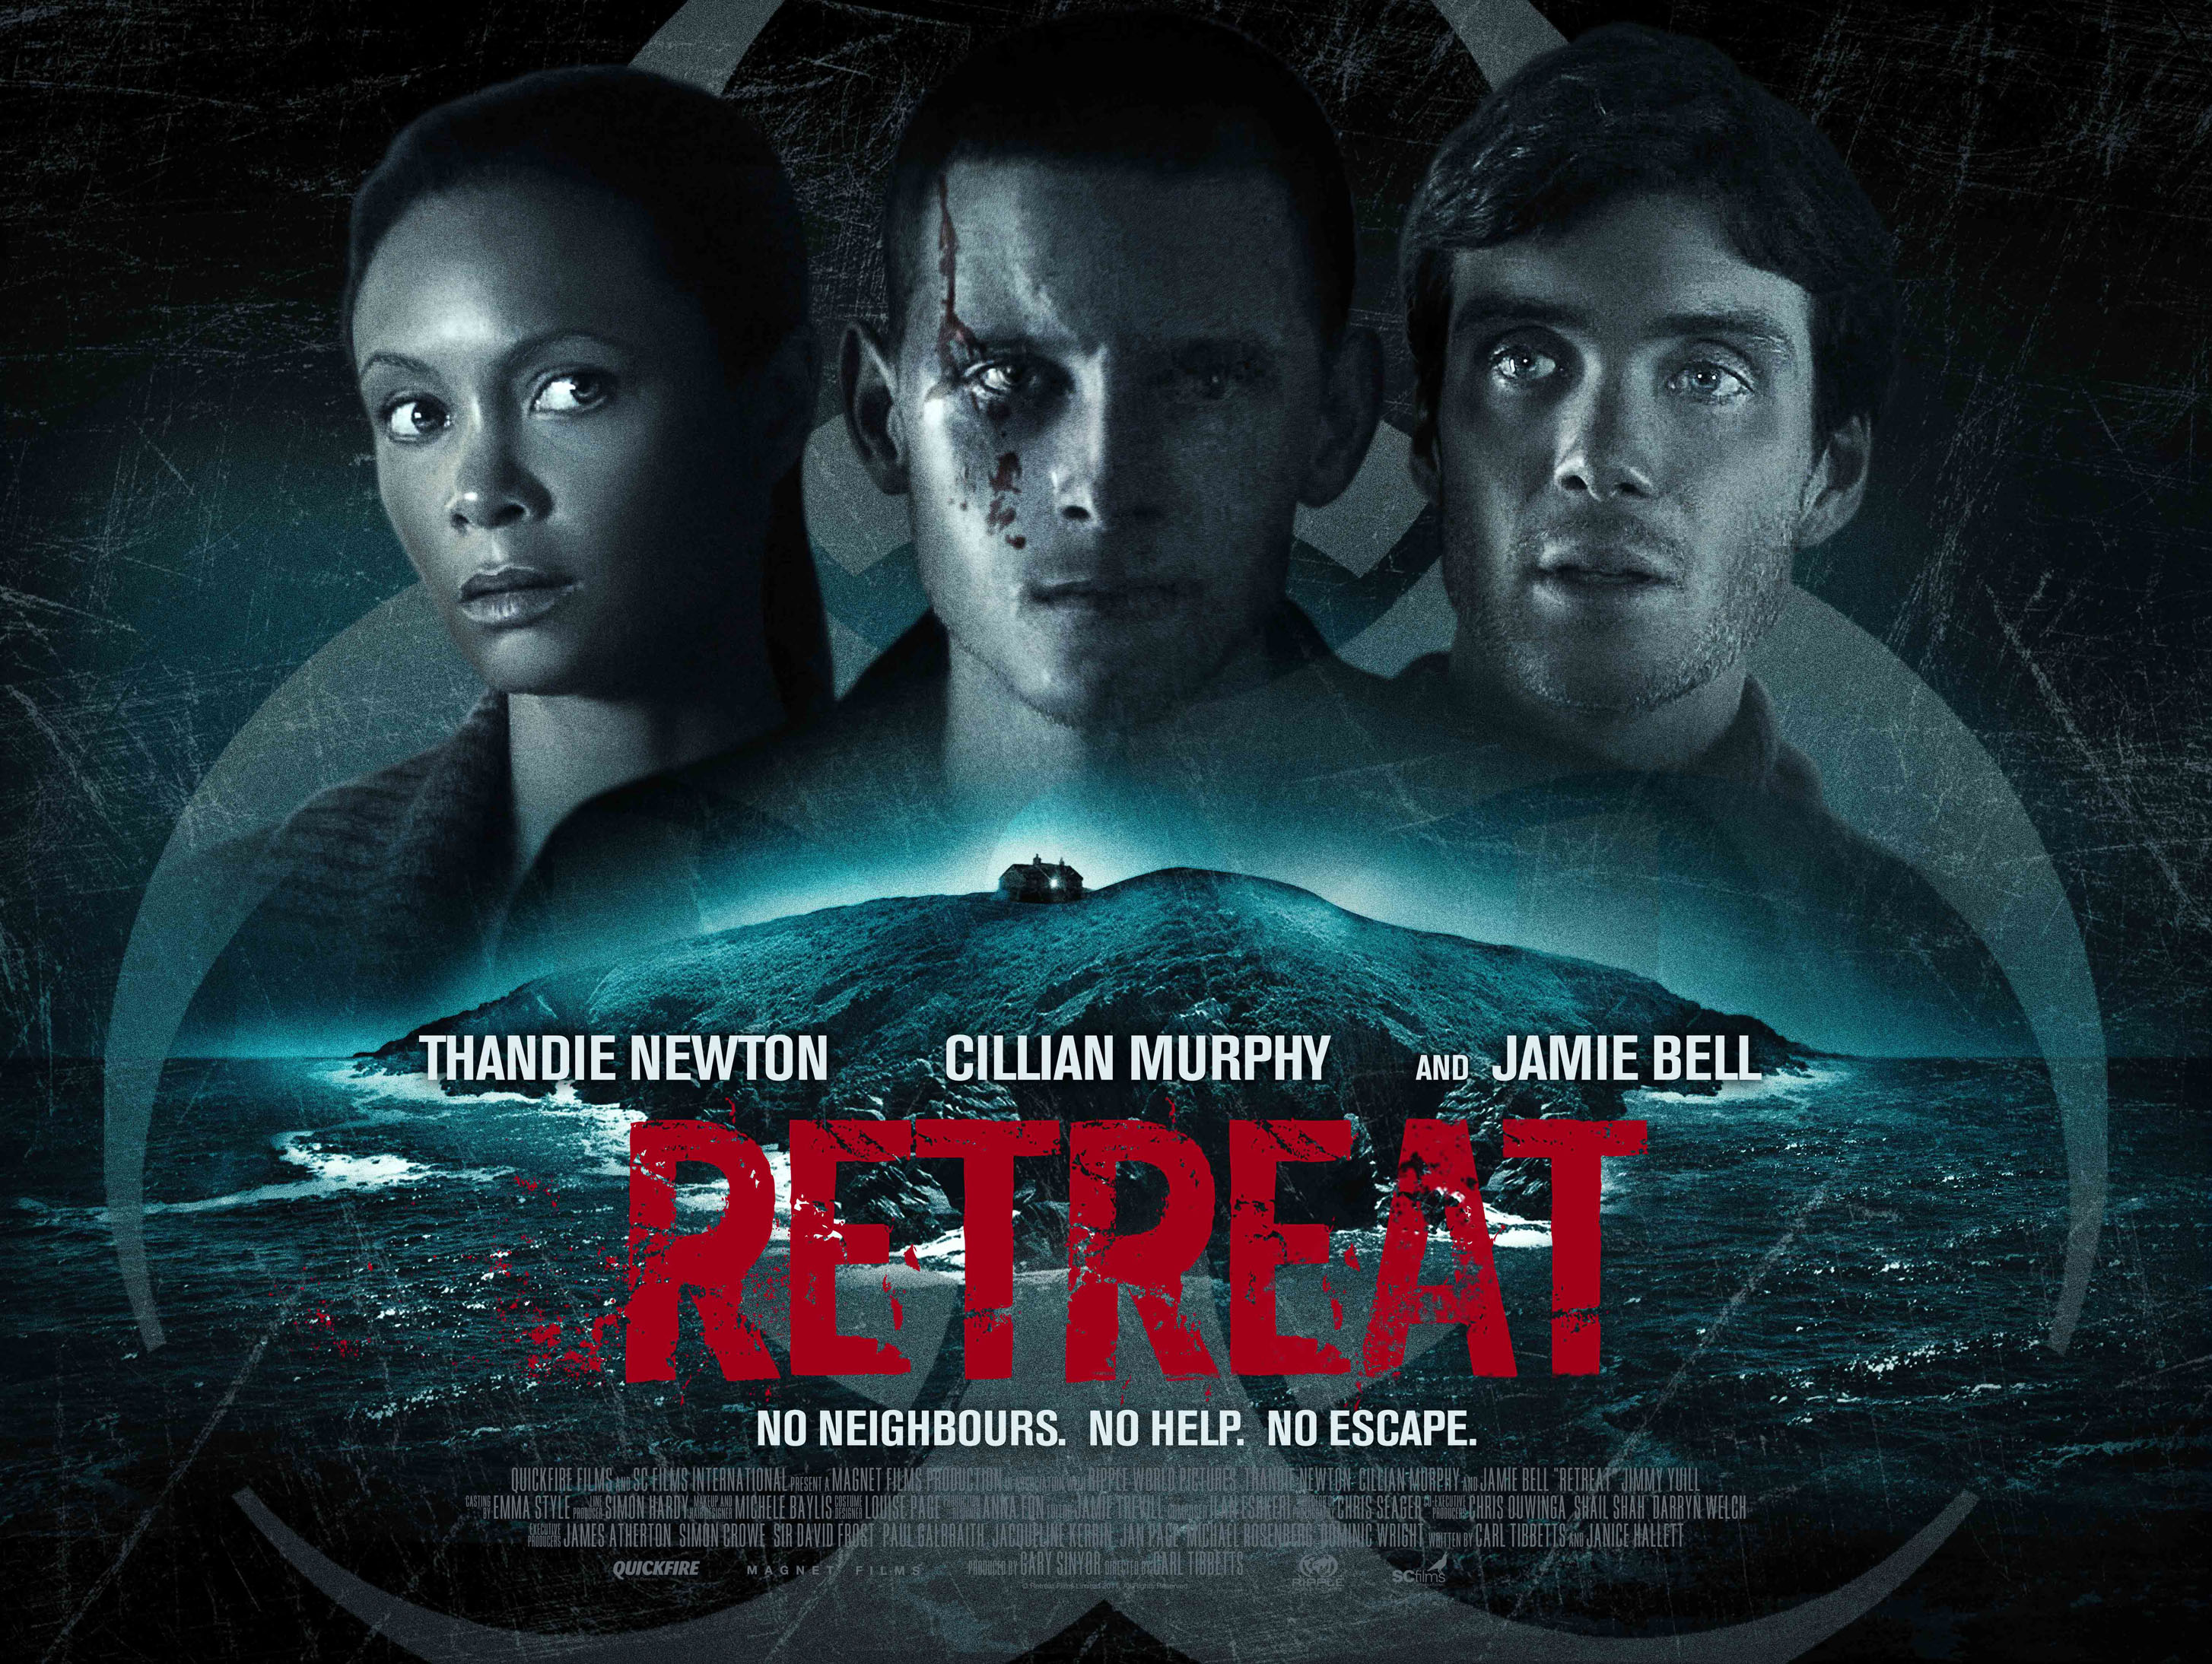 UK Trailer, Poster & Images for Retreat Starring Thandie Newton